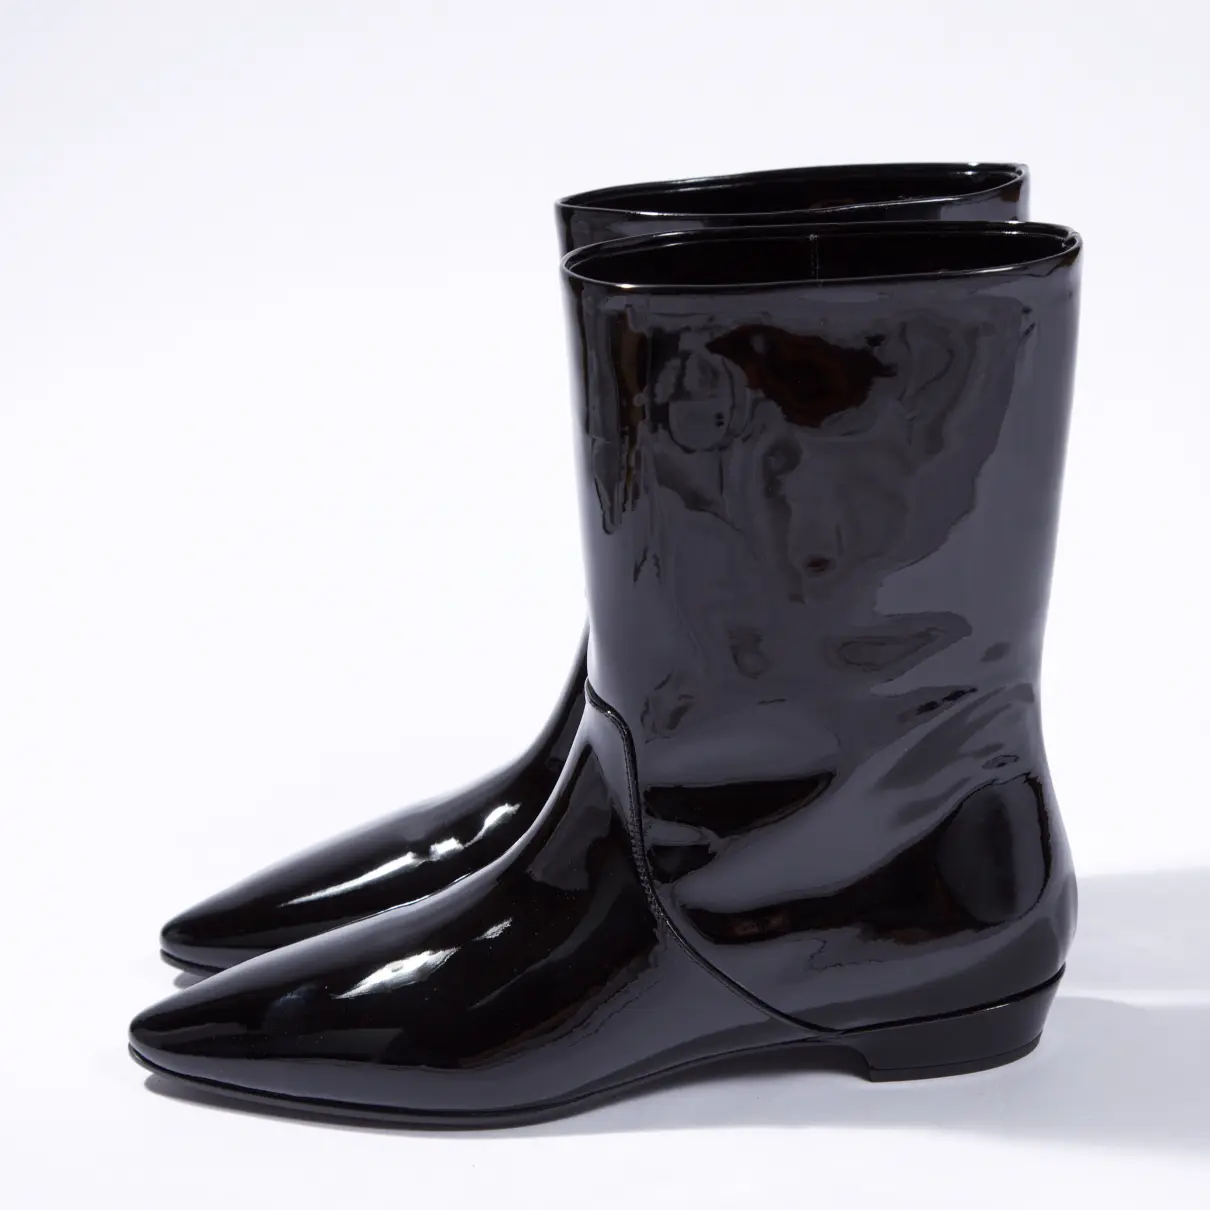 Buy Miu Miu Patent leather ankle boots online